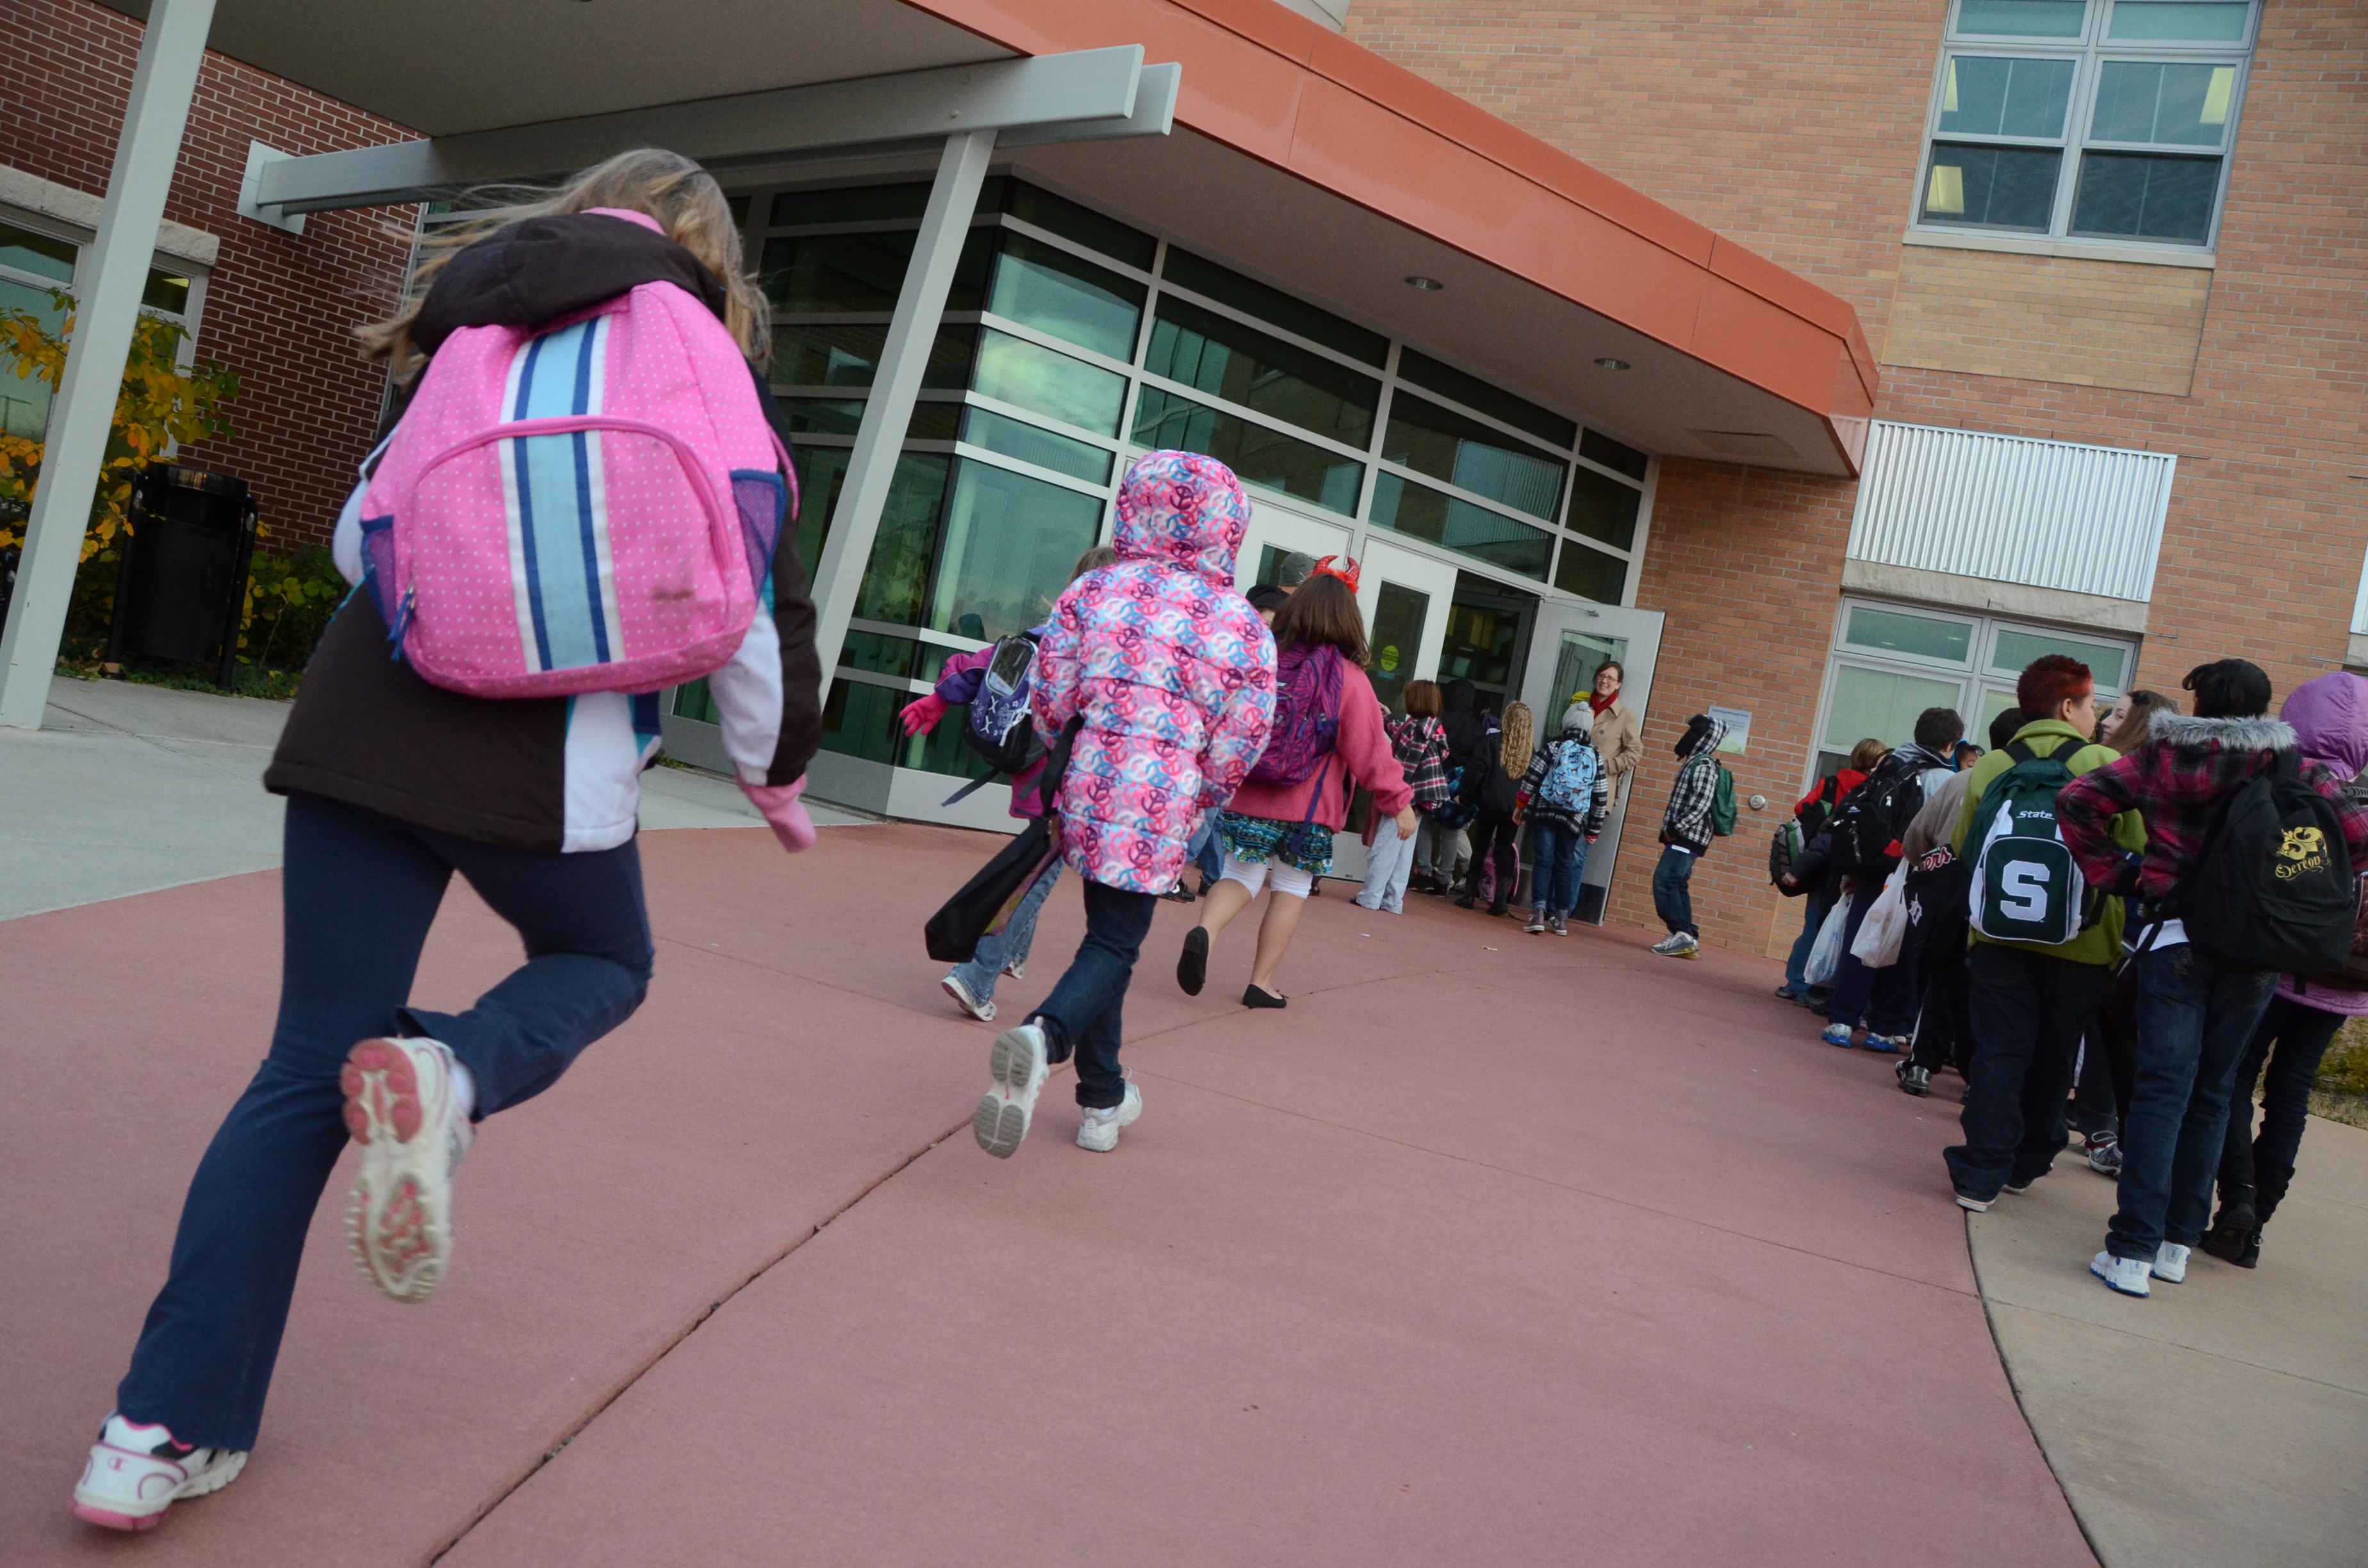 Parents cite many reasons for sending their children to public schools outside of their home district. A new study shows that the average student won’t produce higher test scores in a new district. (Bridge archive photo/Sam Zomer)